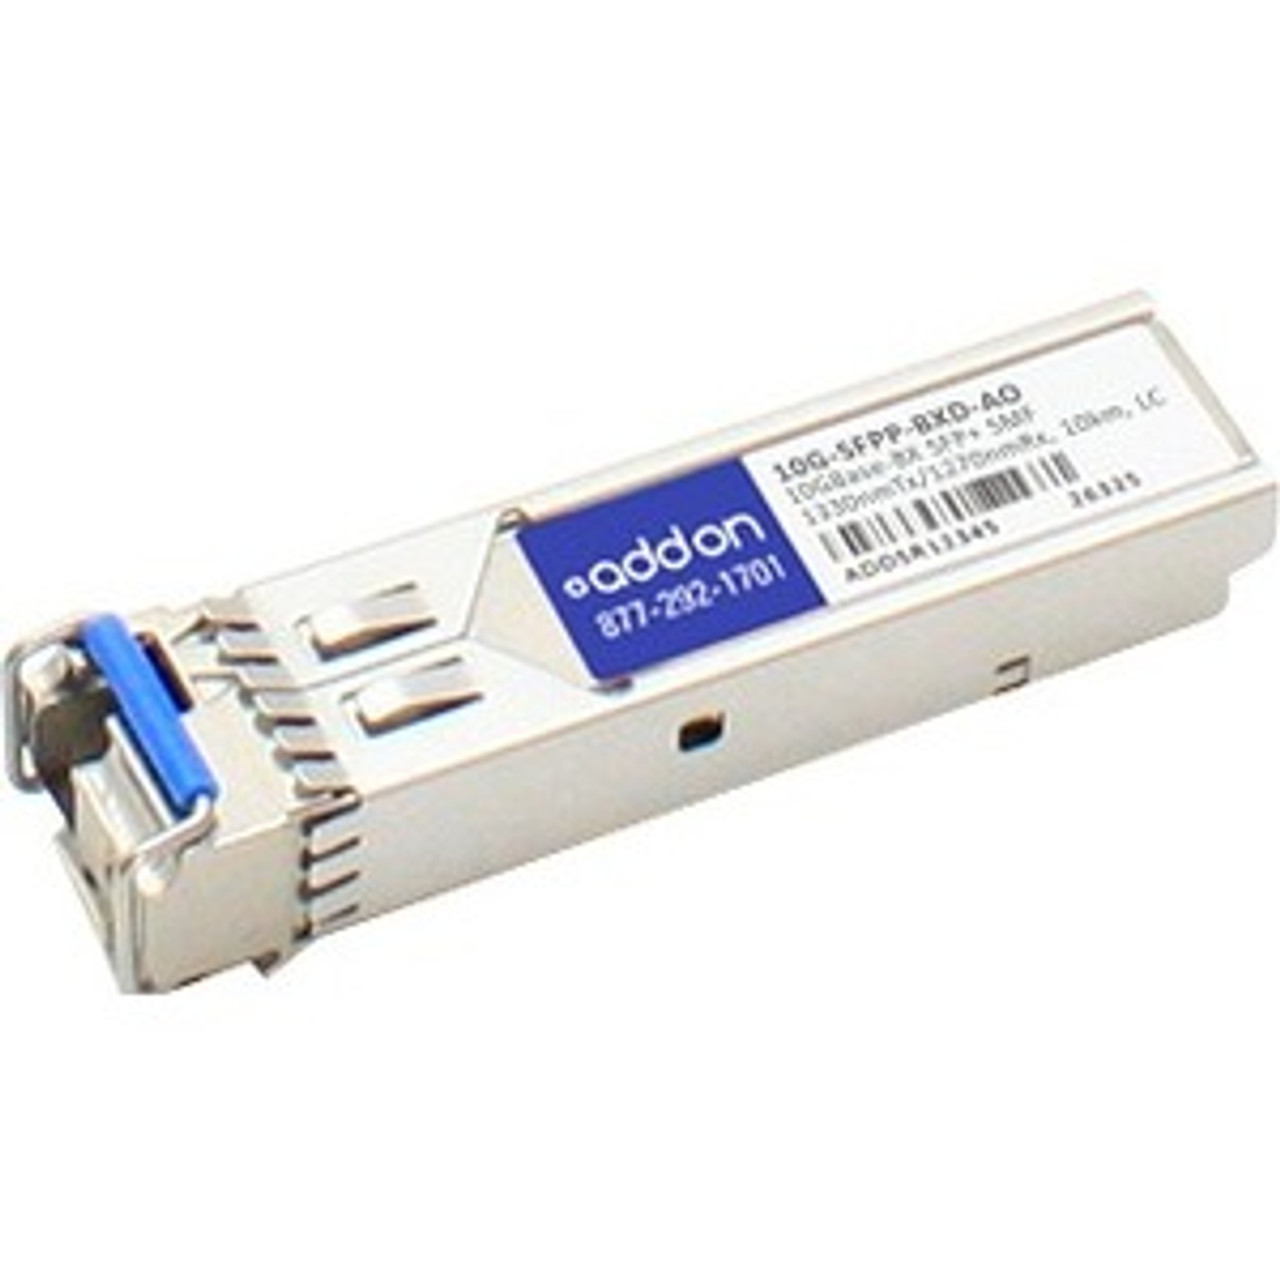 10G-SFPP-BXD-AO AddOn 10Gbps 10GBase-BX10-D Single-mode Fiber 10km 1330nmTX/1270nmRX LC Connector SFP+ Transceiver Module with DOM for Brocade Compatible